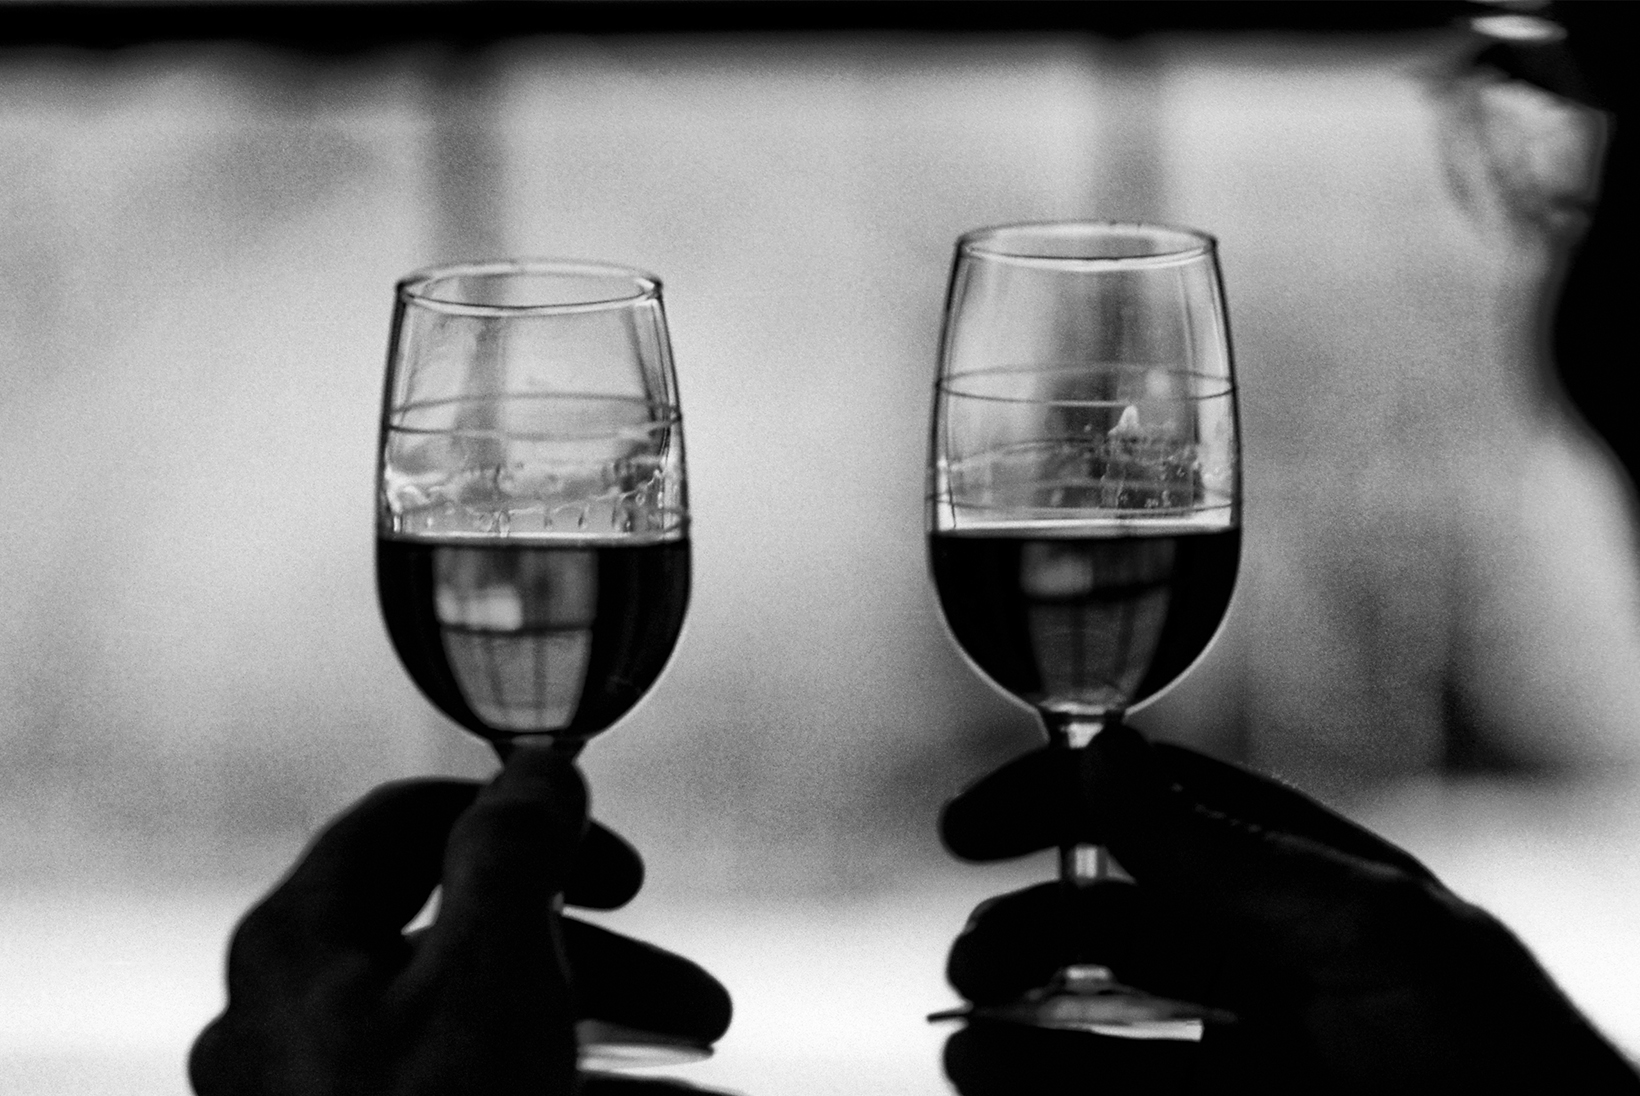 Two wine glasses held up in a toast.